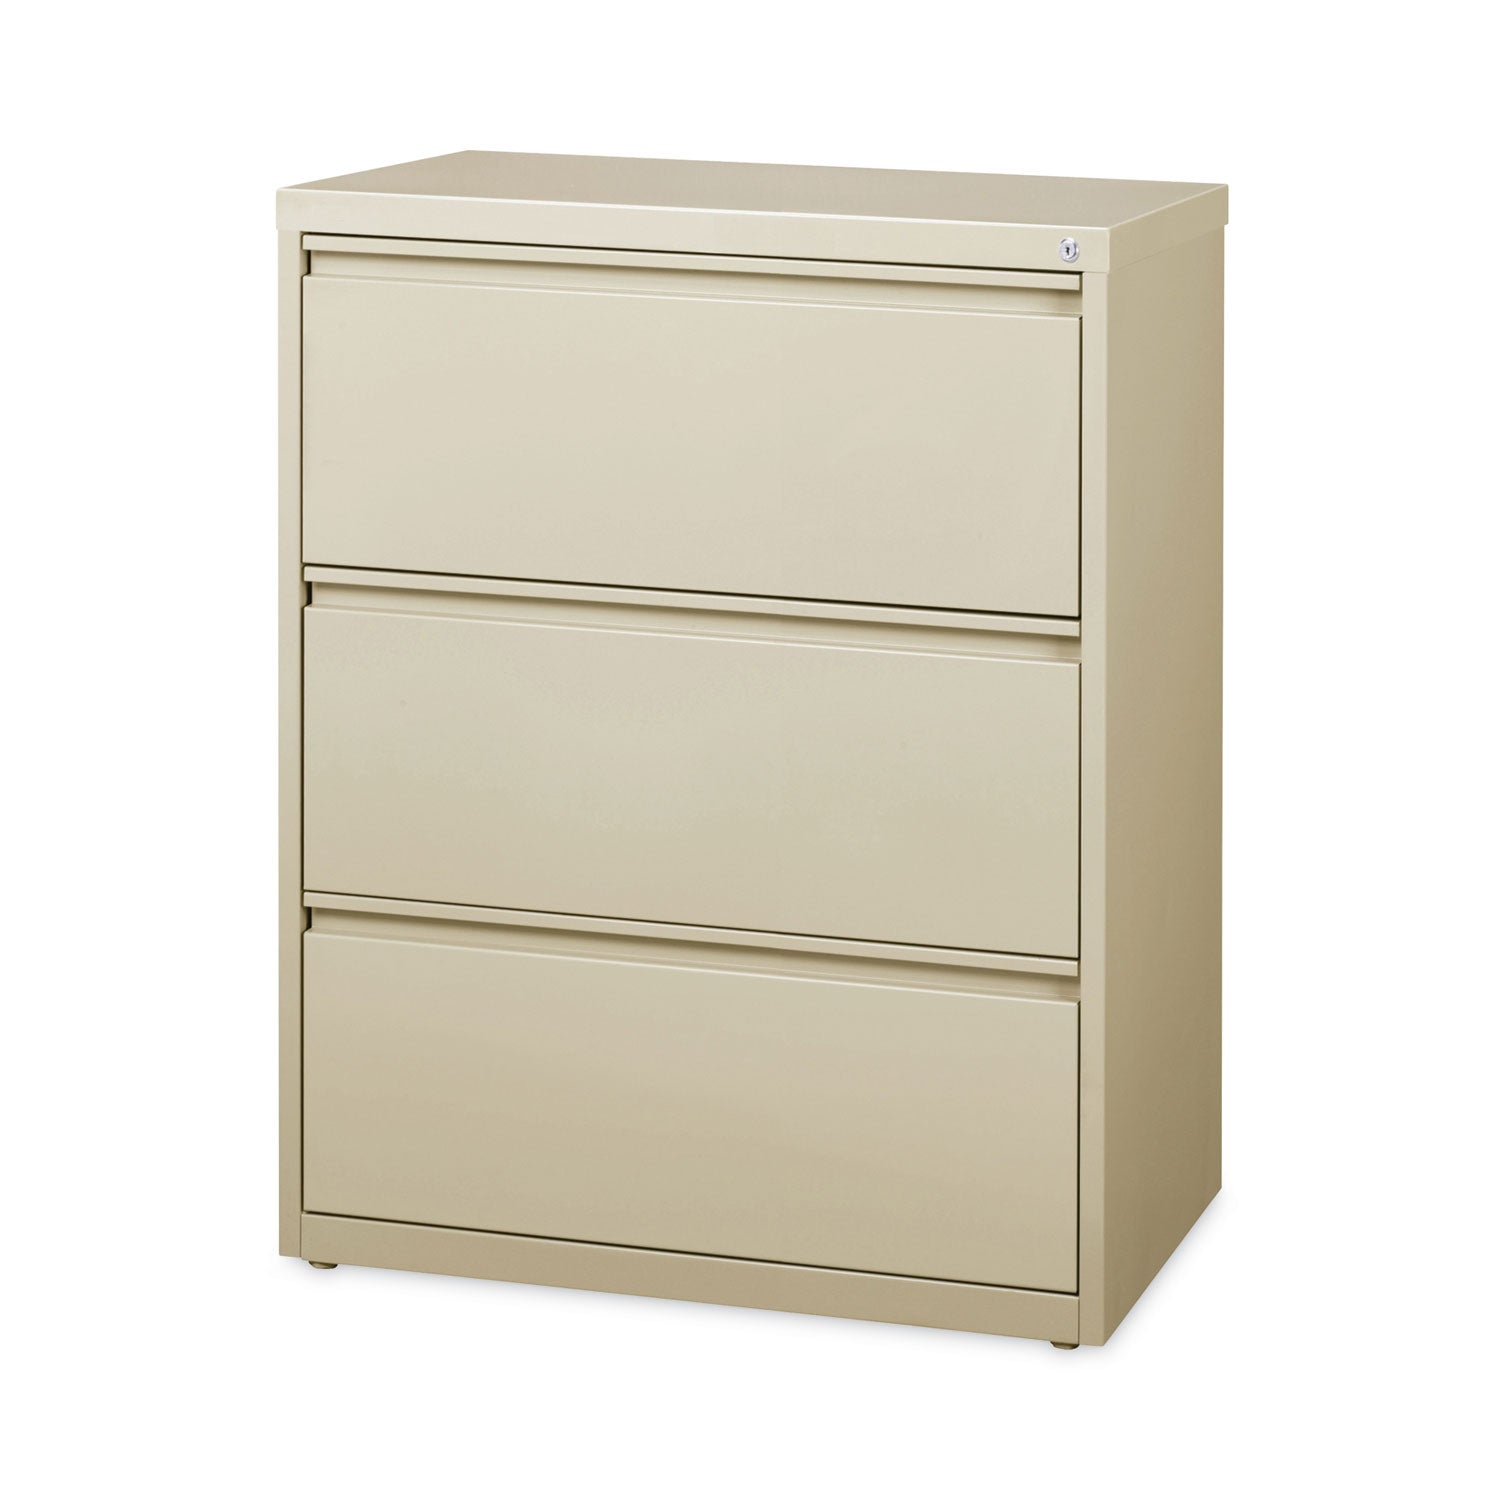 lateral-file-cabinet-3-letter-legal-a4-size-file-drawers-putty-30-x-1862-x-4025_hid14973 - 2